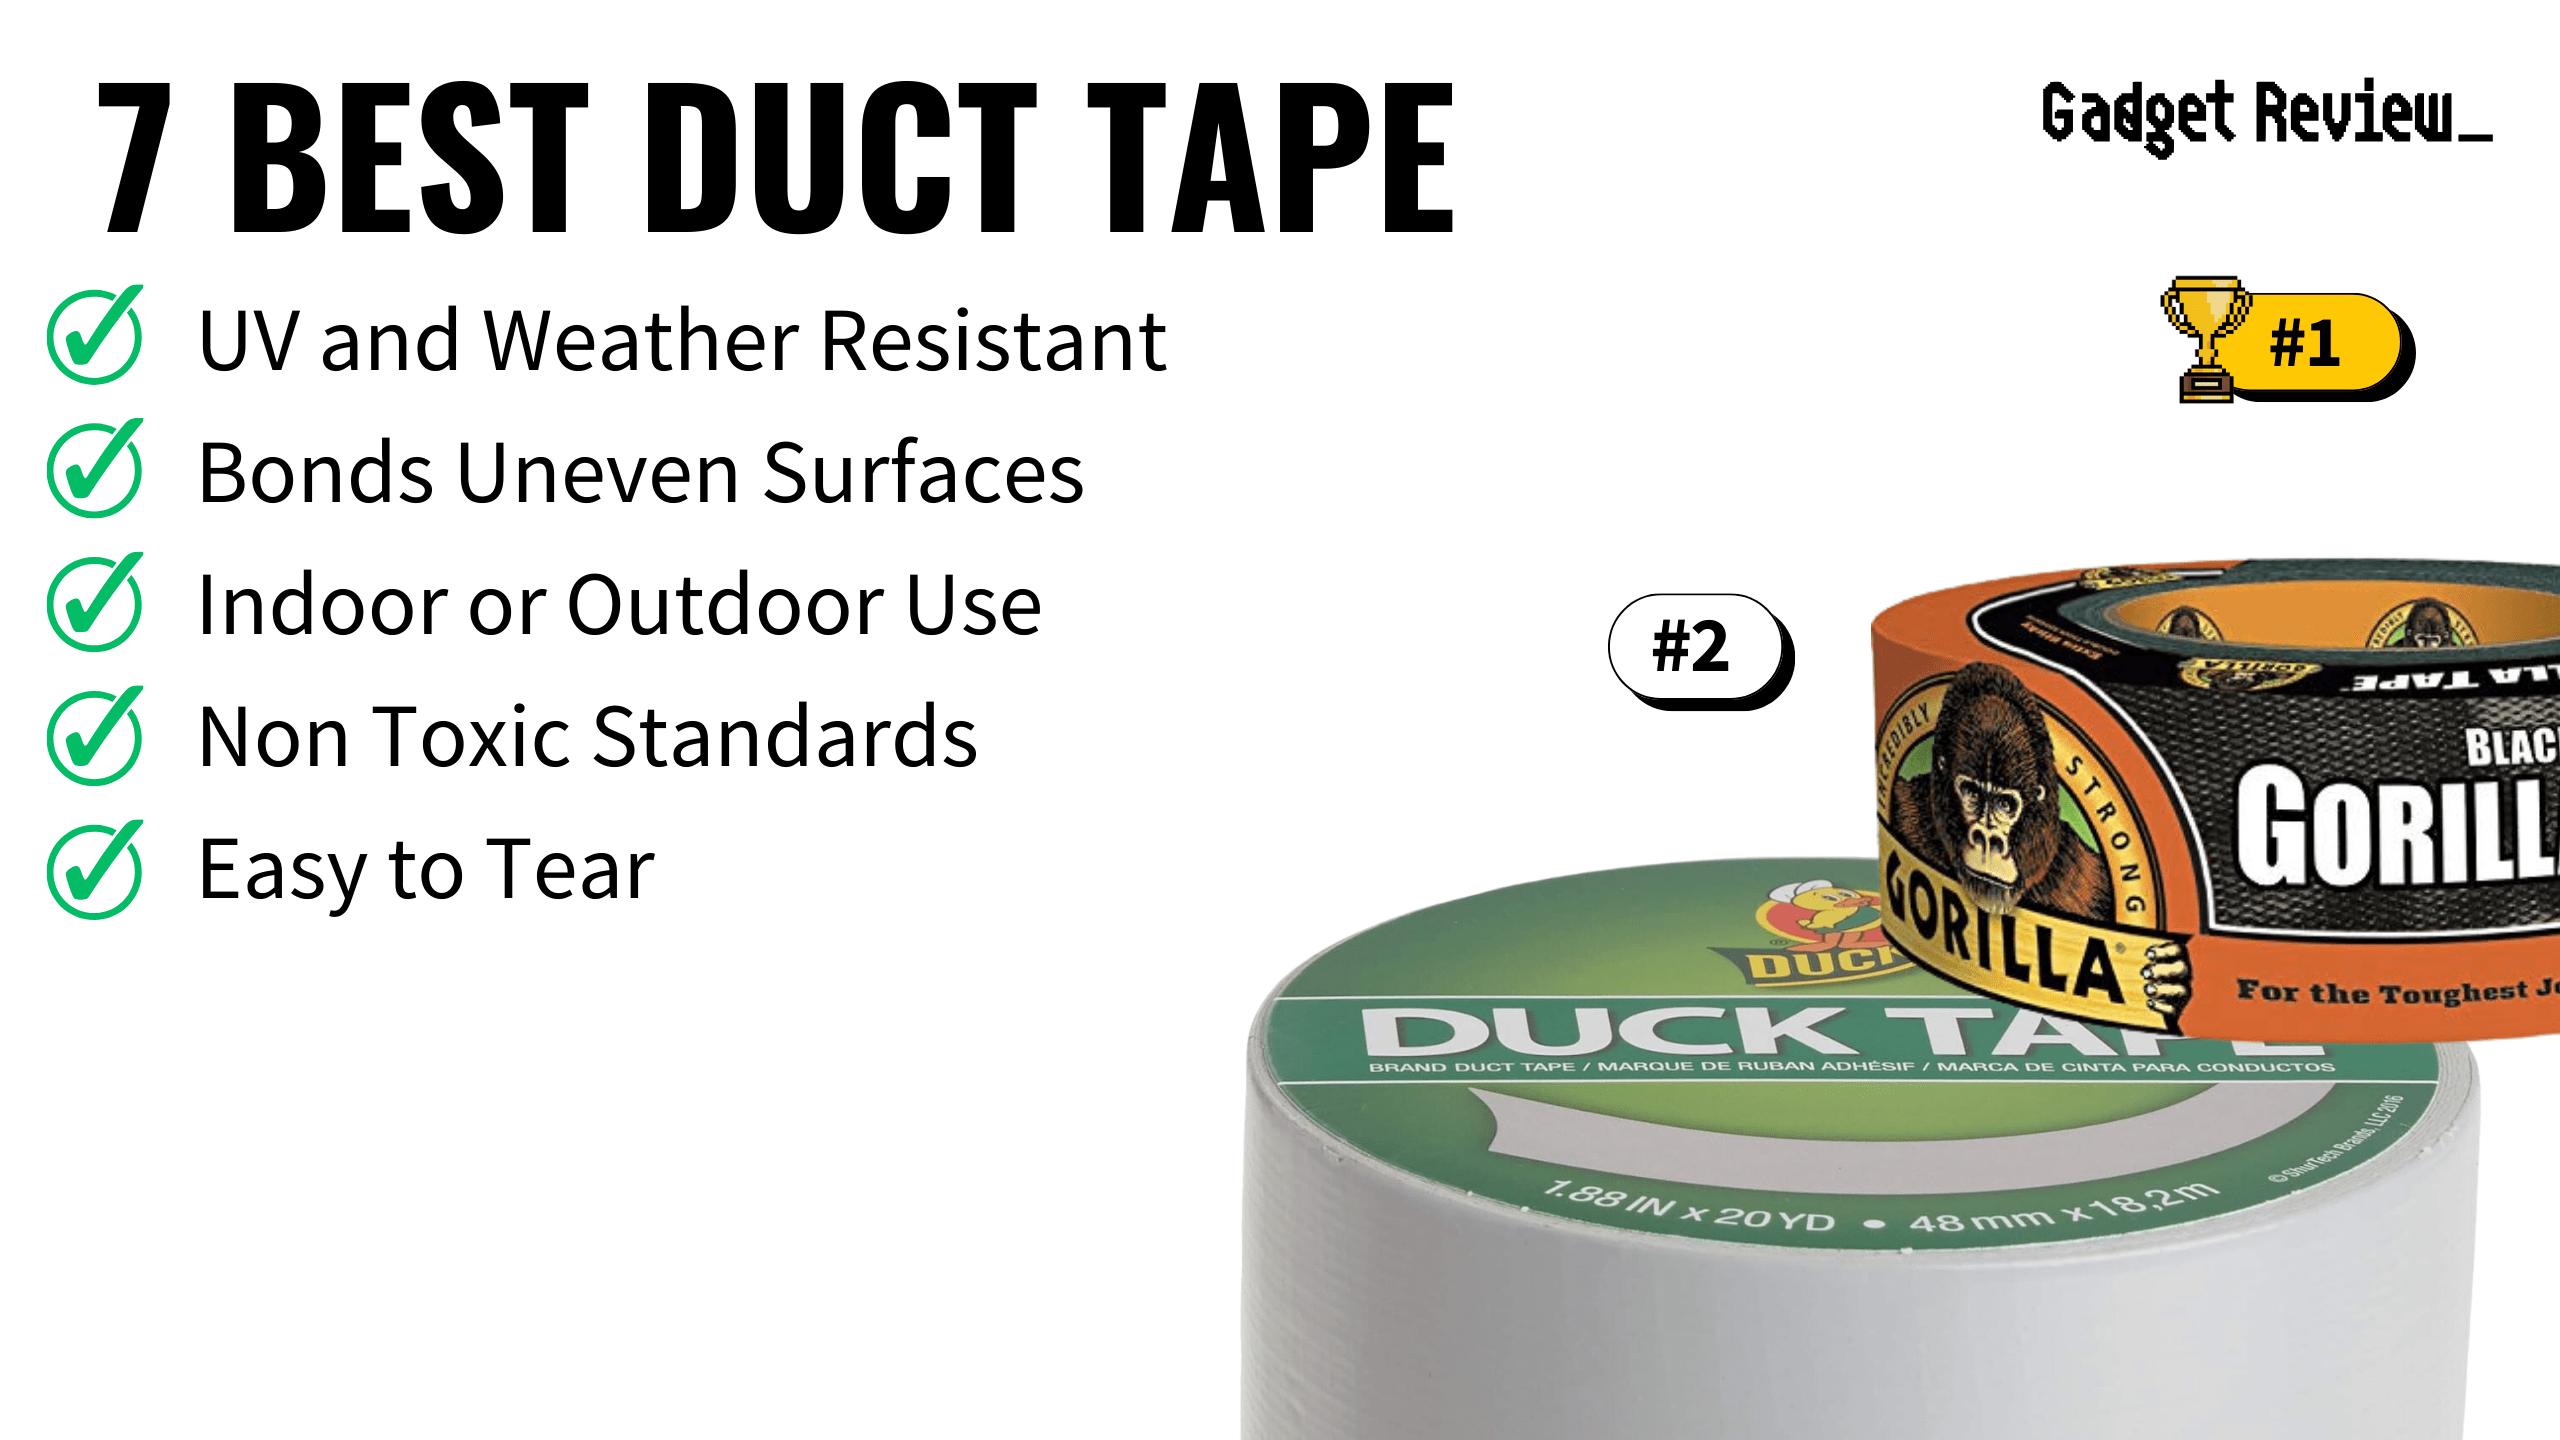 7 Best Duct Tape